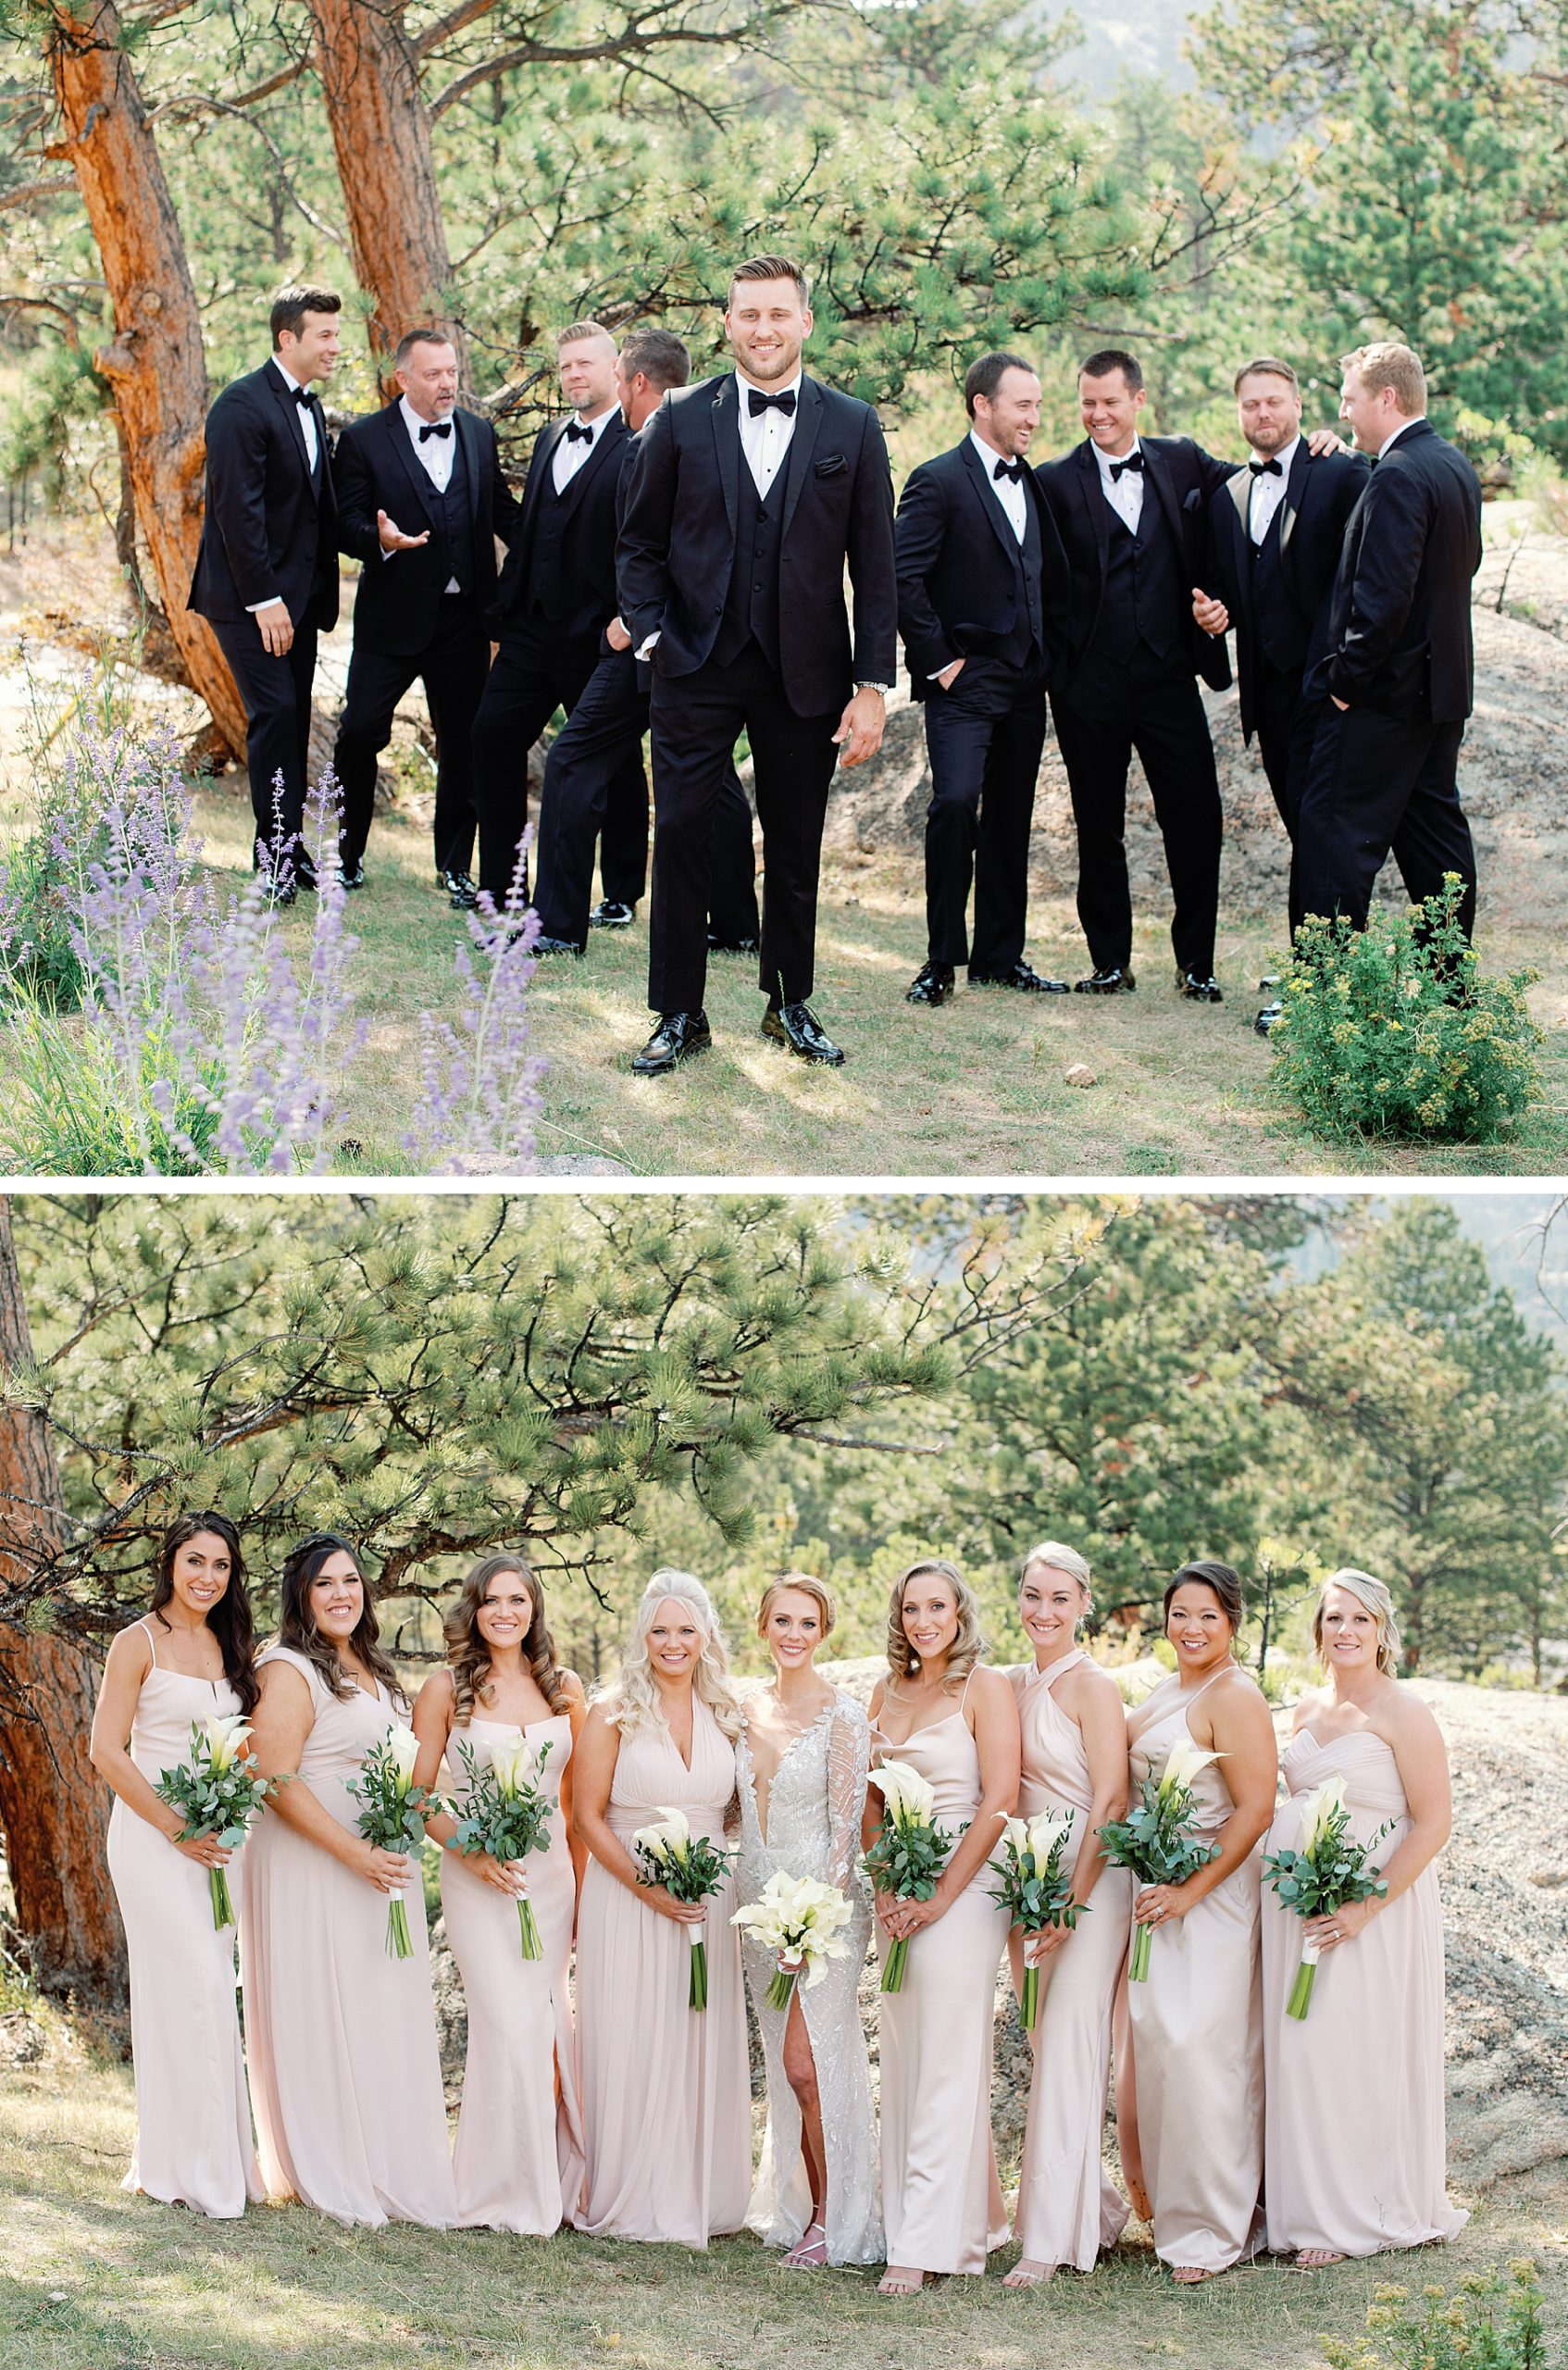 Groomsmen wearing black tuxes and bridesmaids wearing champagne dresses at The Boulders at Black Canyon Inn